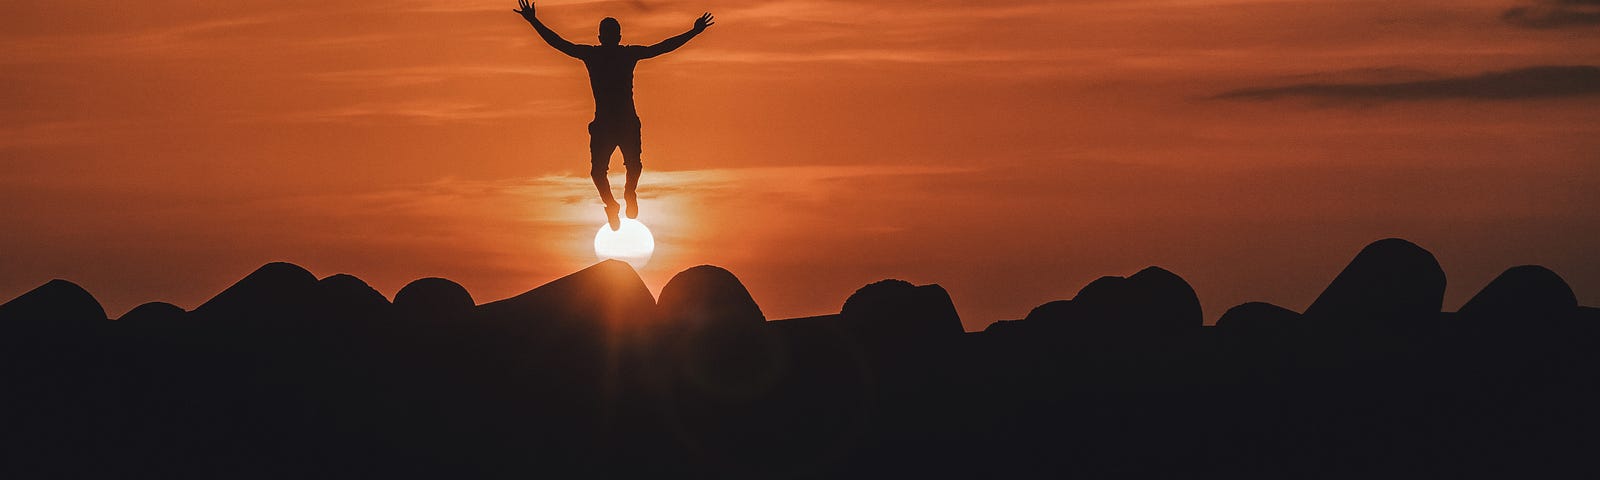 man with open arms appearing to jump off sun at sunset